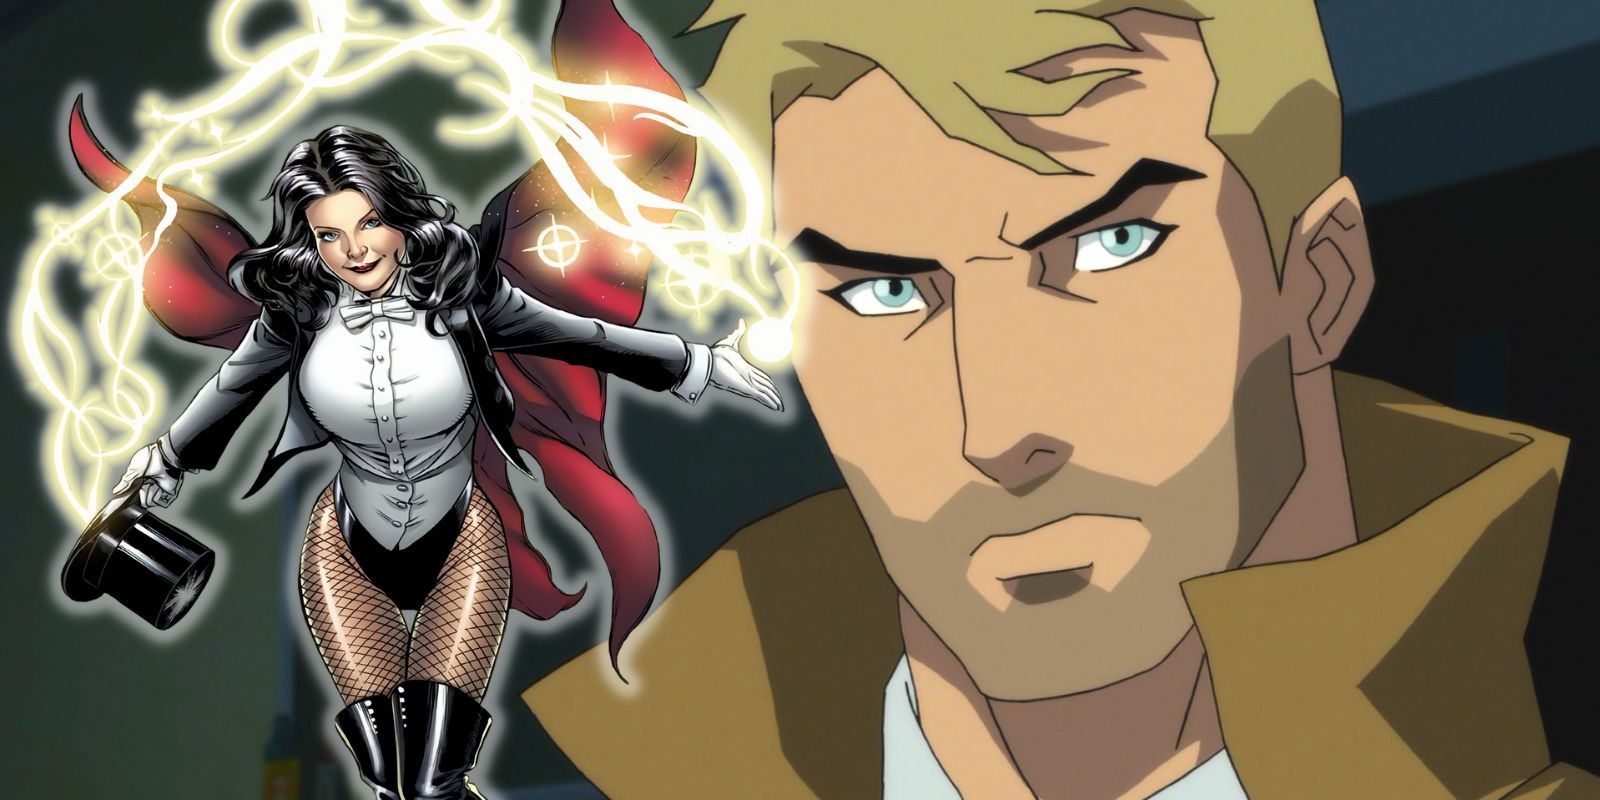 Zatanna casting a spell next to Constantine - DC characters